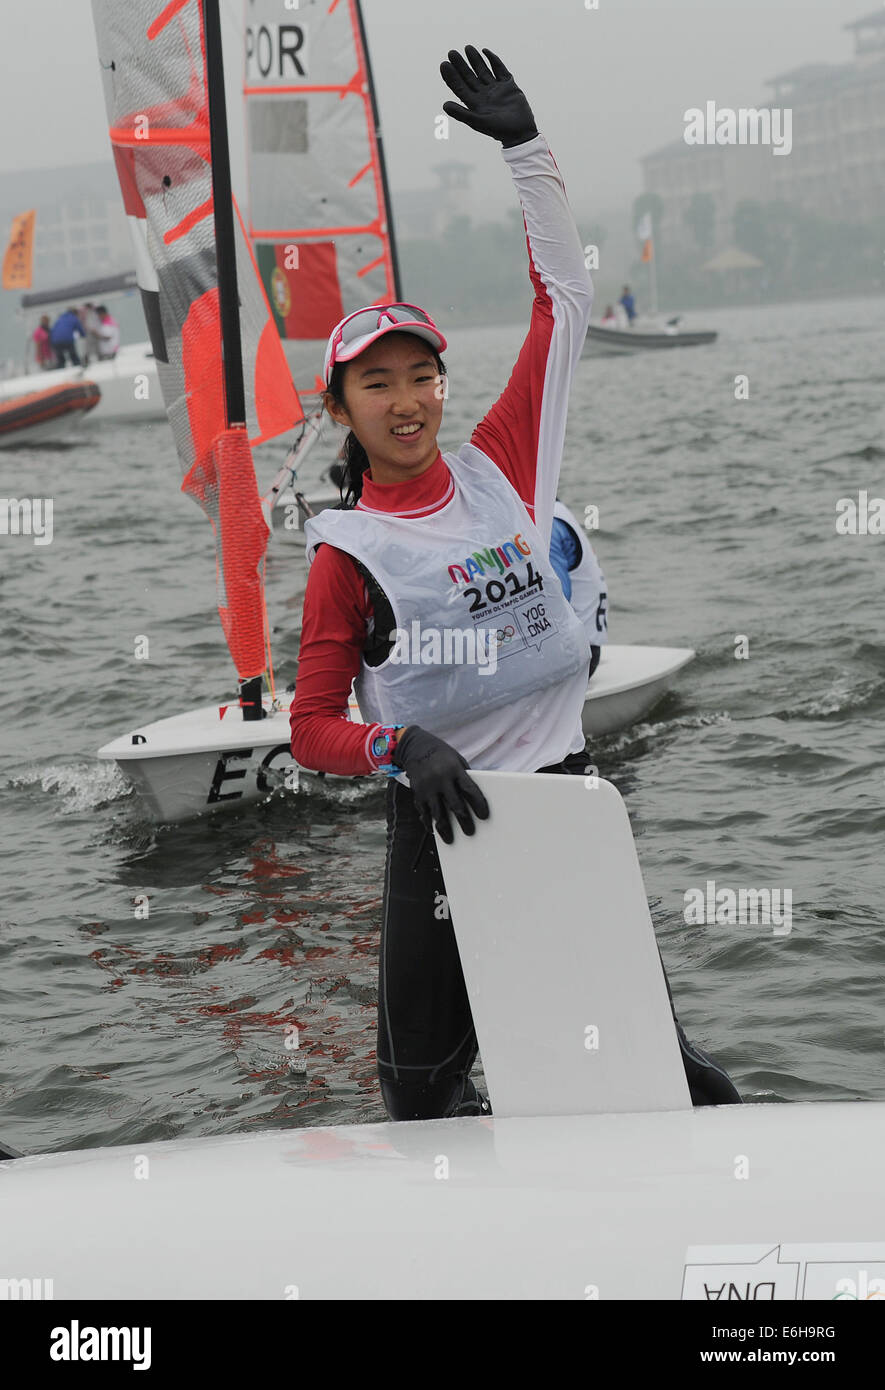 (SP)YOG-CHINA-NANJING-SAILING-WOMEN (140824) -- Samantha Yom of Singapore celebrates after the Byte CII- Women?s One Person Dinghy Final Race of Sailing at the Nanjing 2014 Youth Olympic Games in Nanjing, capital of east China's Jiangsu Province, on August 24, 2014. Samantha Yom won the gold medal. (Xinhua/Chen Cheng)(jyt) Stock Photo